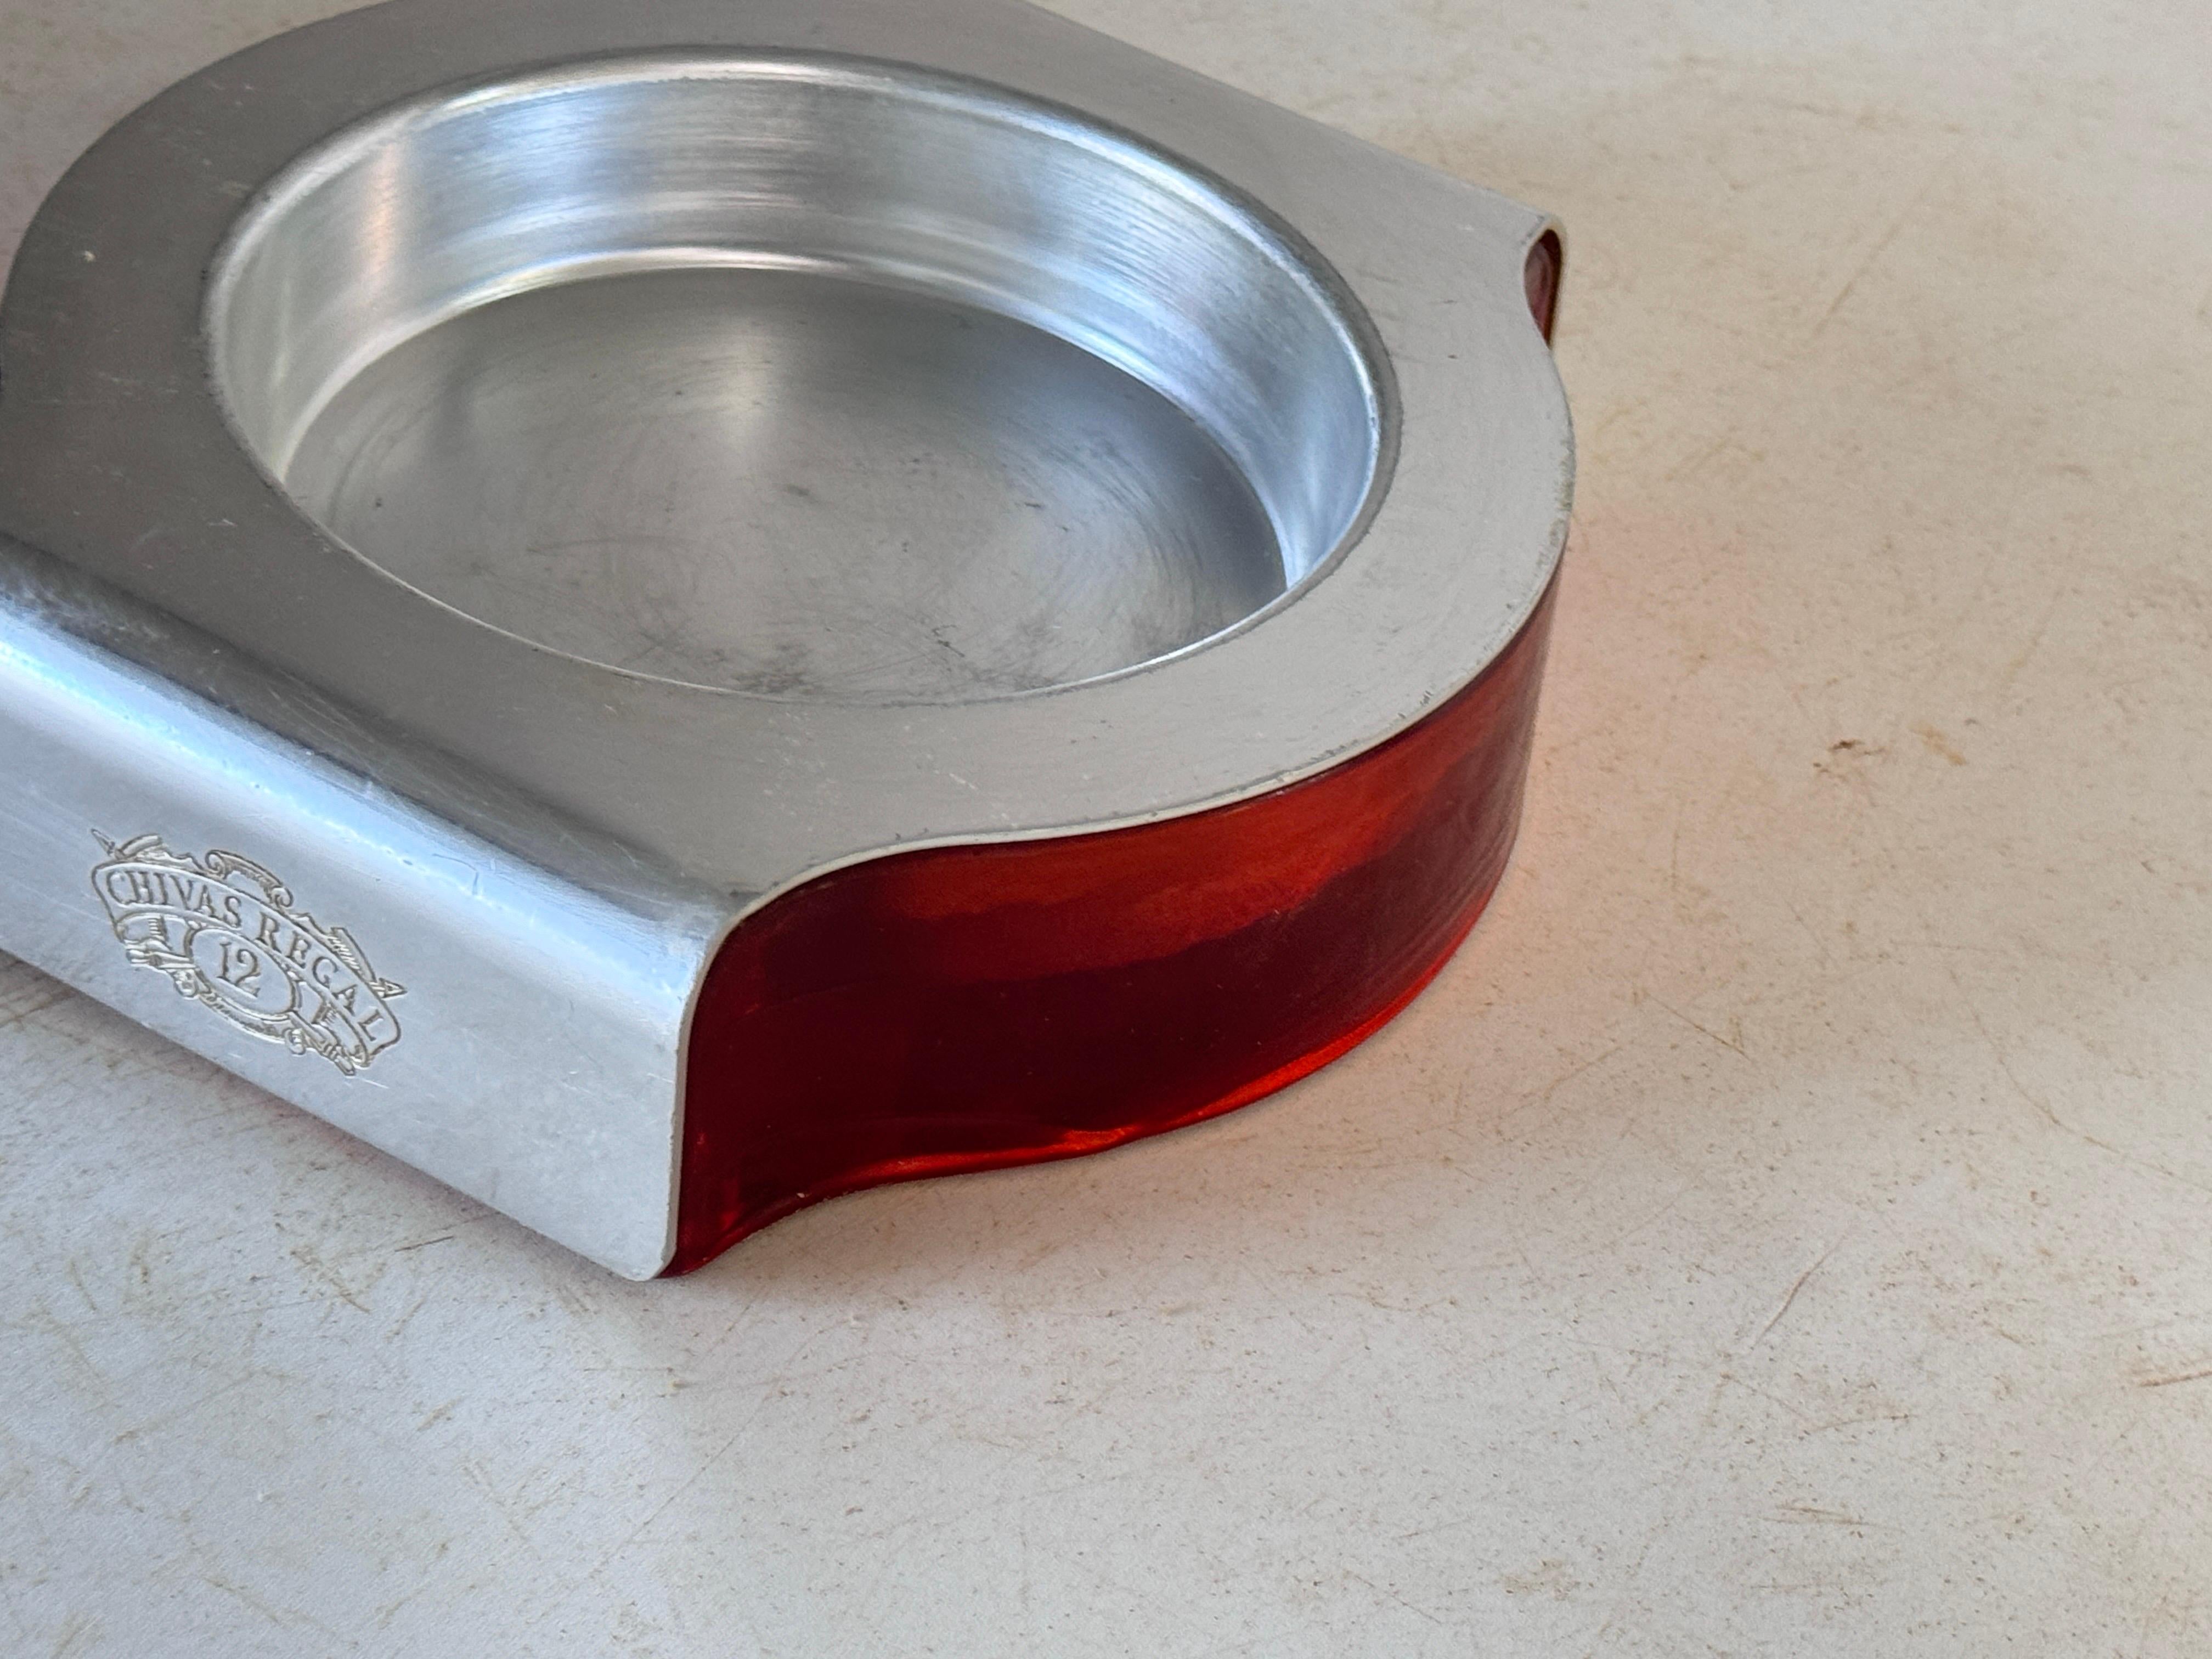 Ashtray in Glass and Aluminium. Signed Chivas
France  
Silvered and red color.
Very Heavy